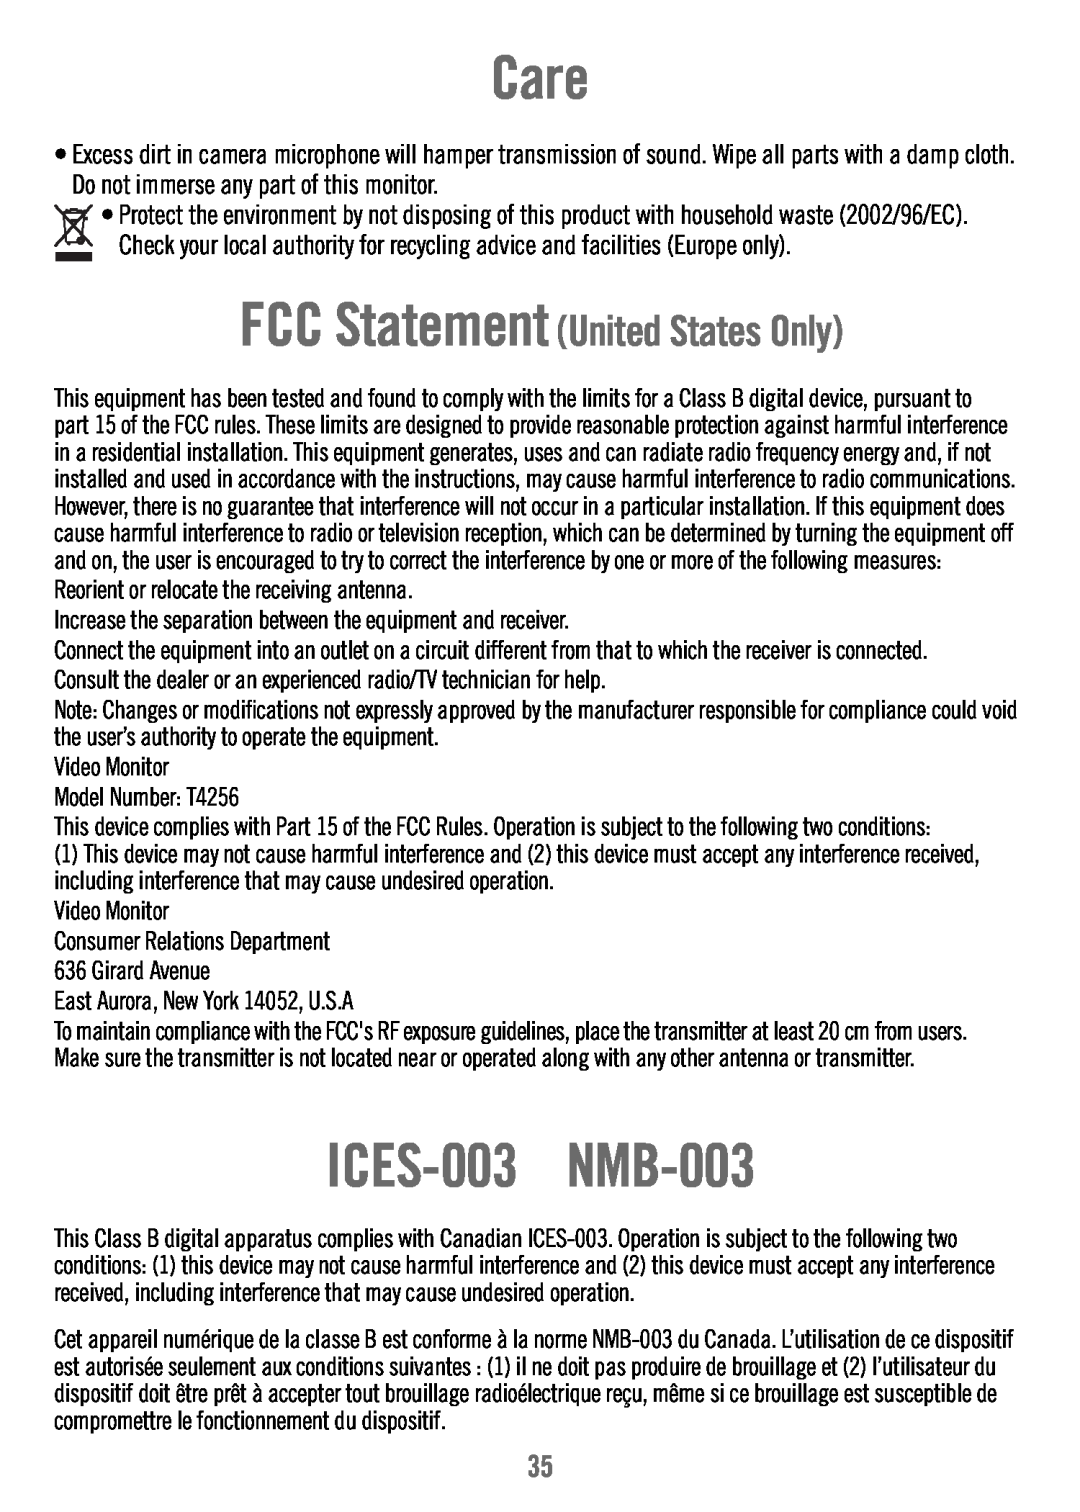 Fisher-Price T4256 manual Care, ICES-003 NMB-003, FCC Statement United States Only 